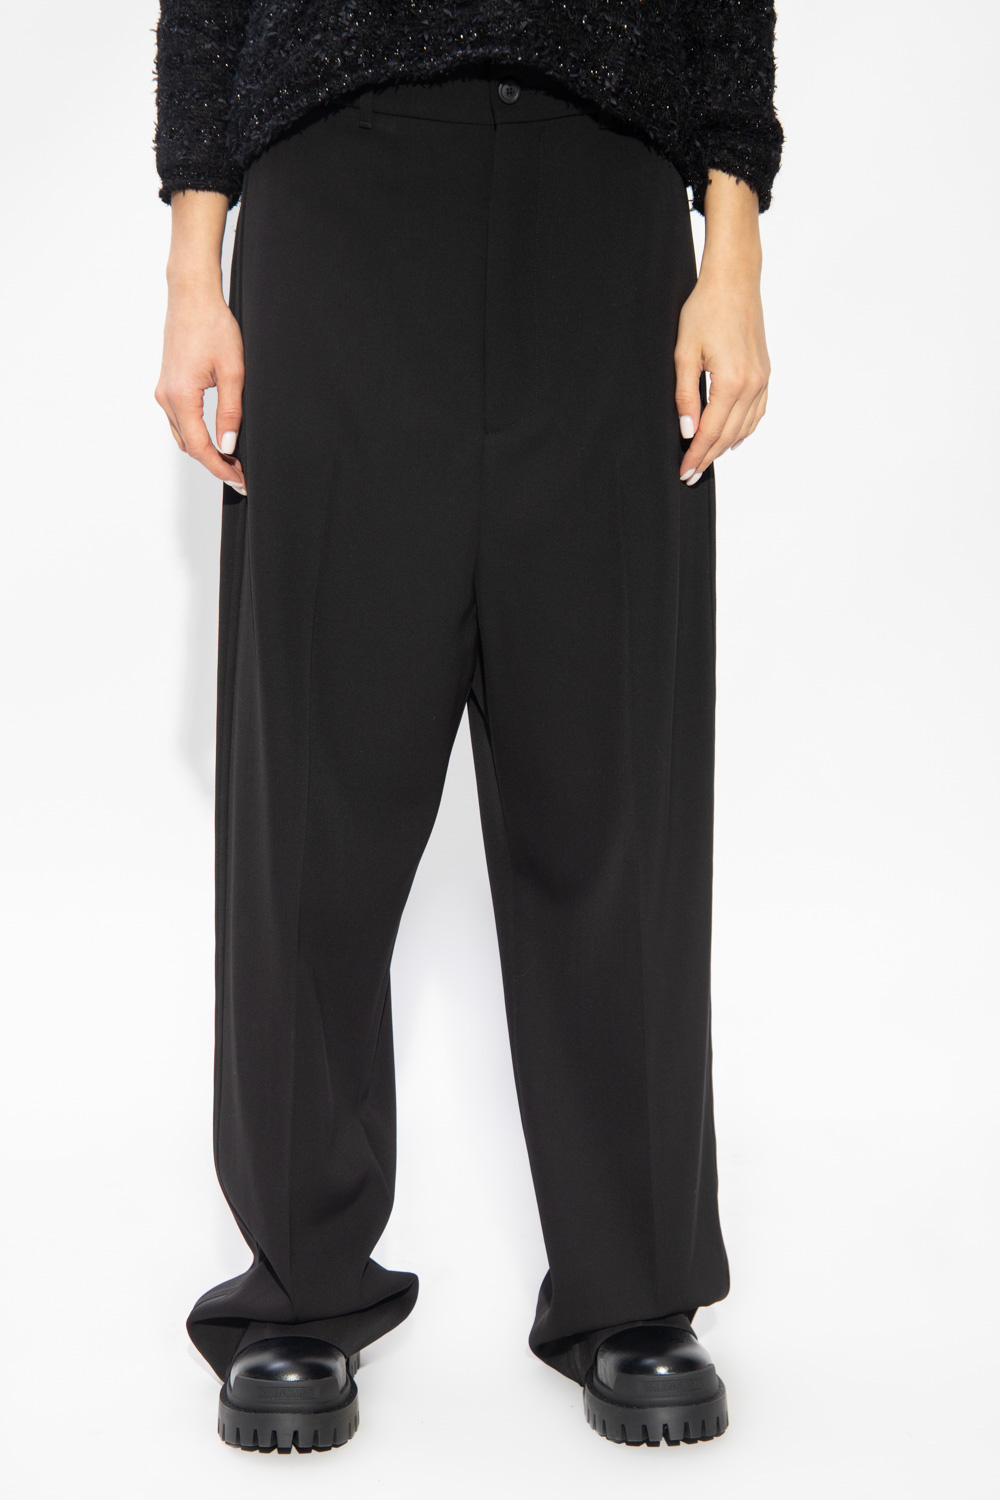 Balenciaga Pleat-front Red trousers with drop crotch